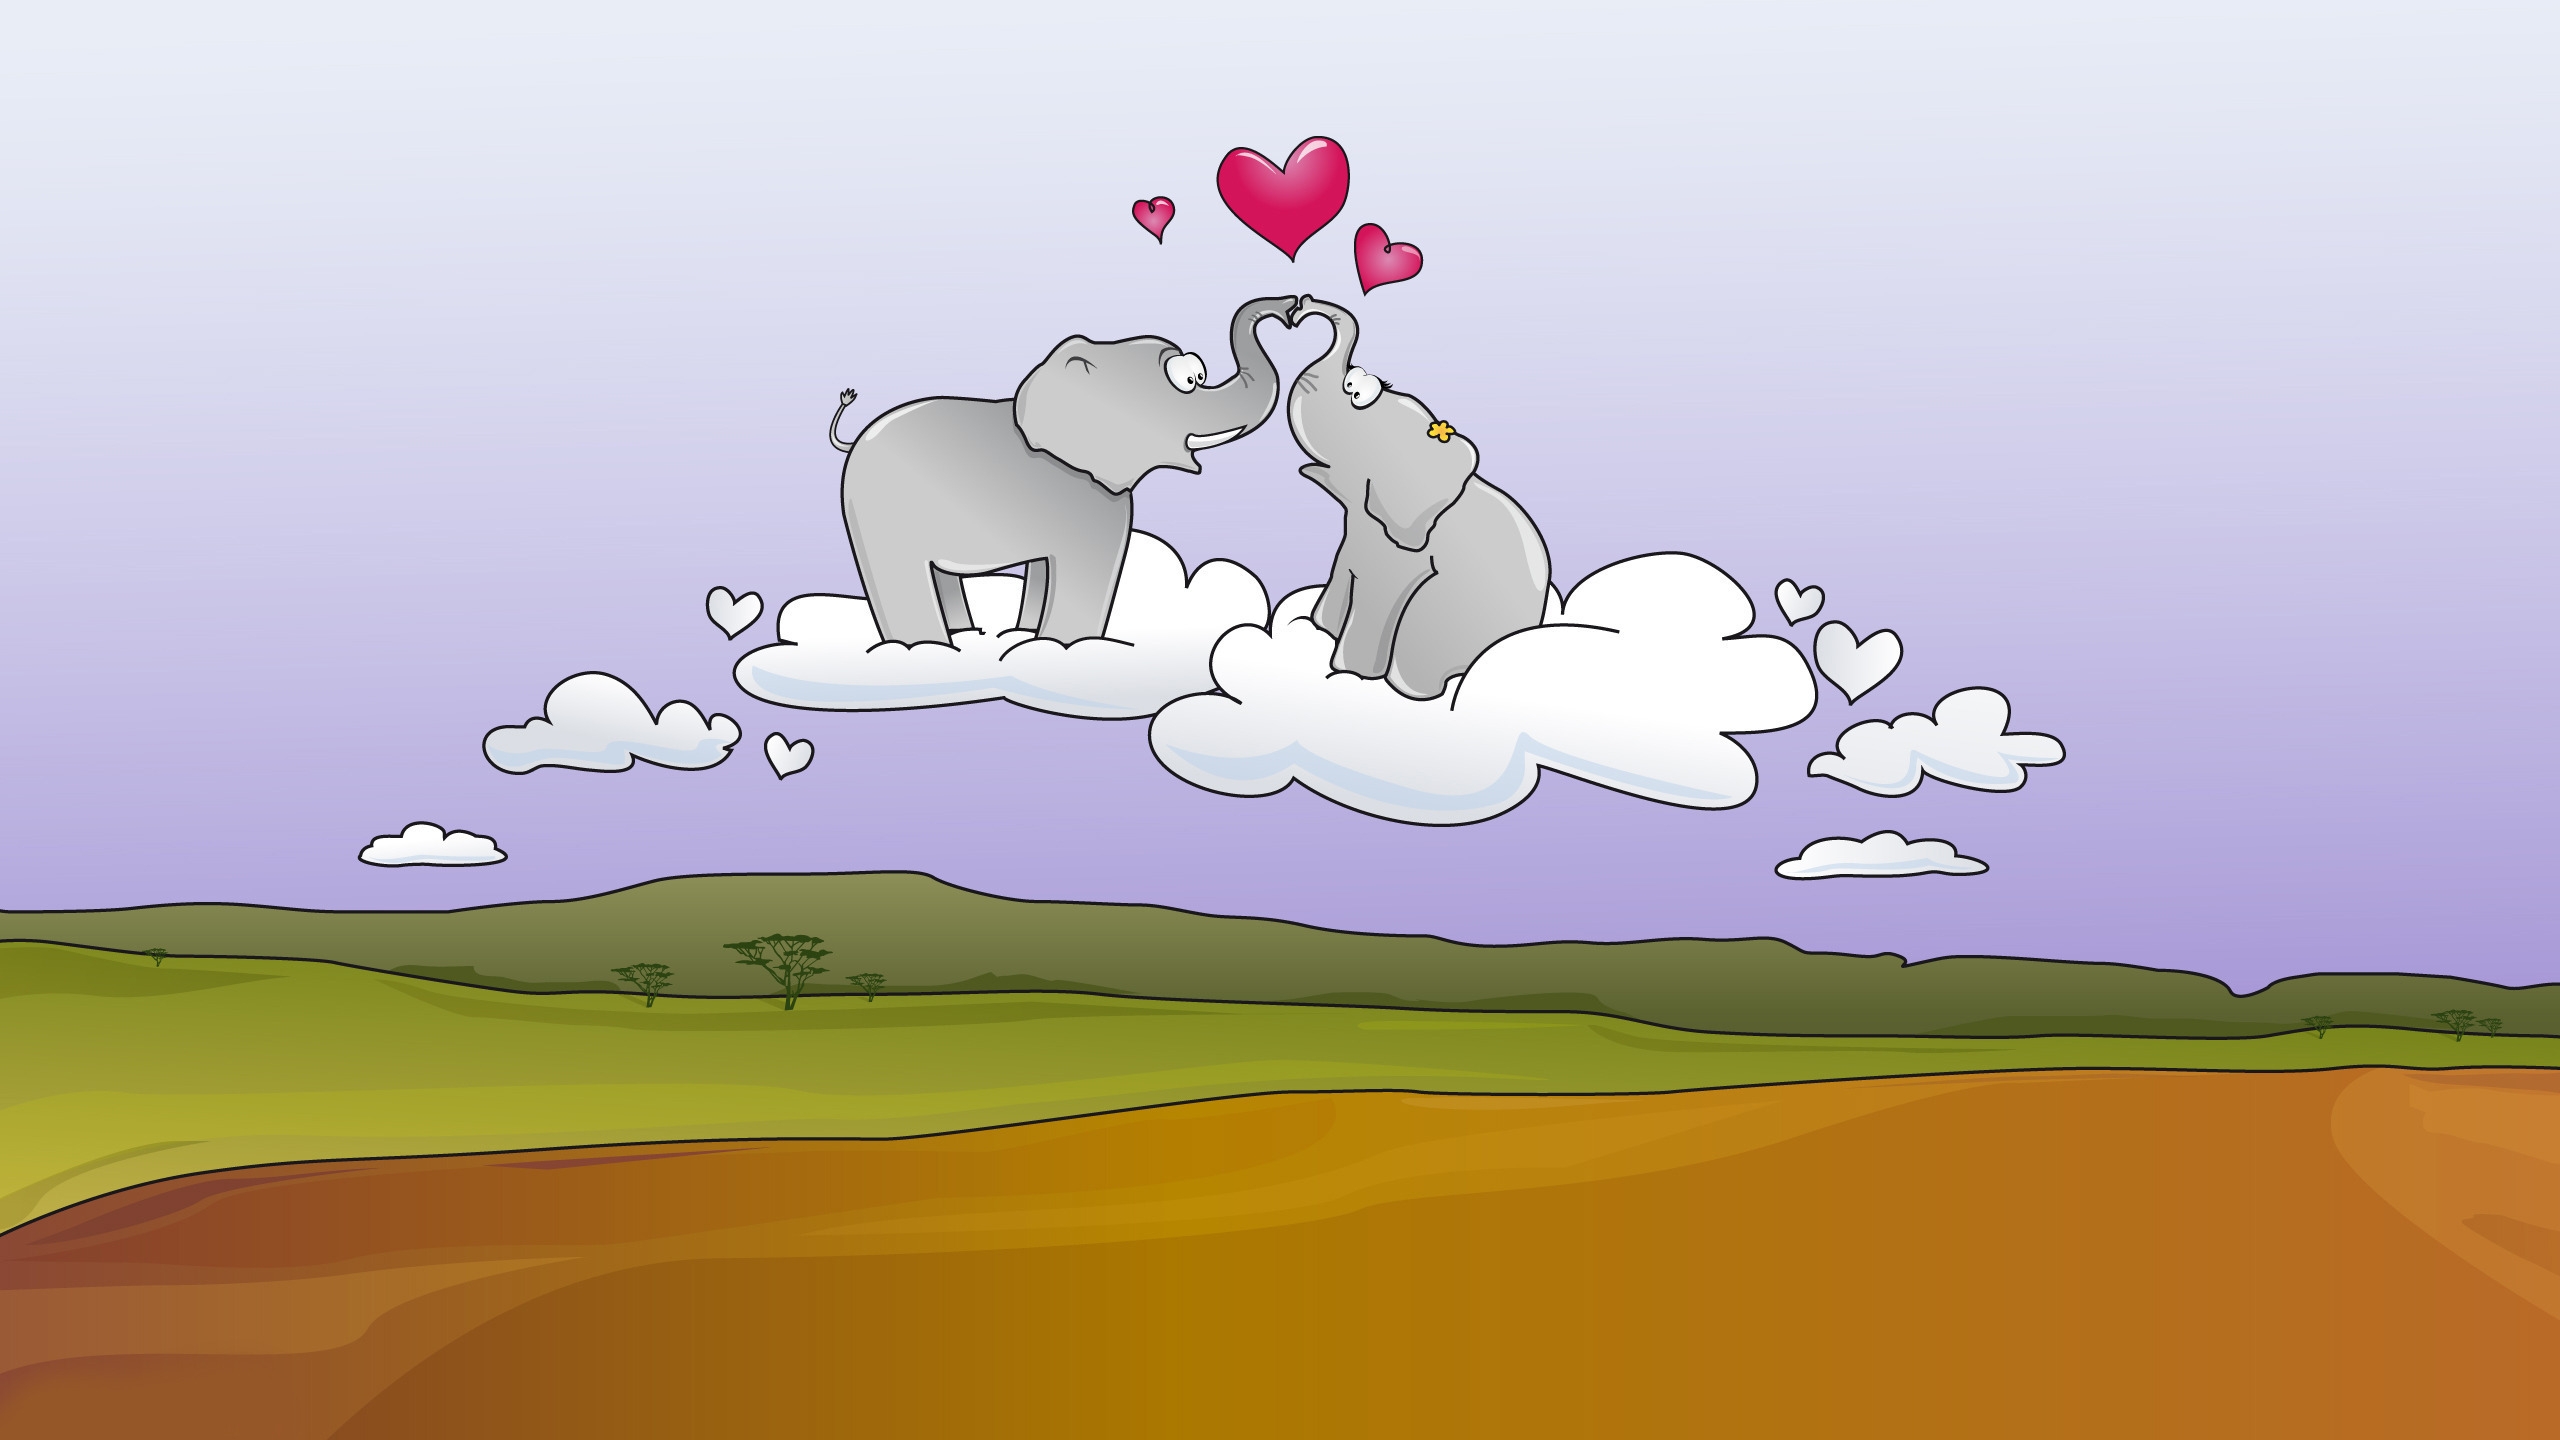 Love is in The Air for 2560x1440 HDTV resolution